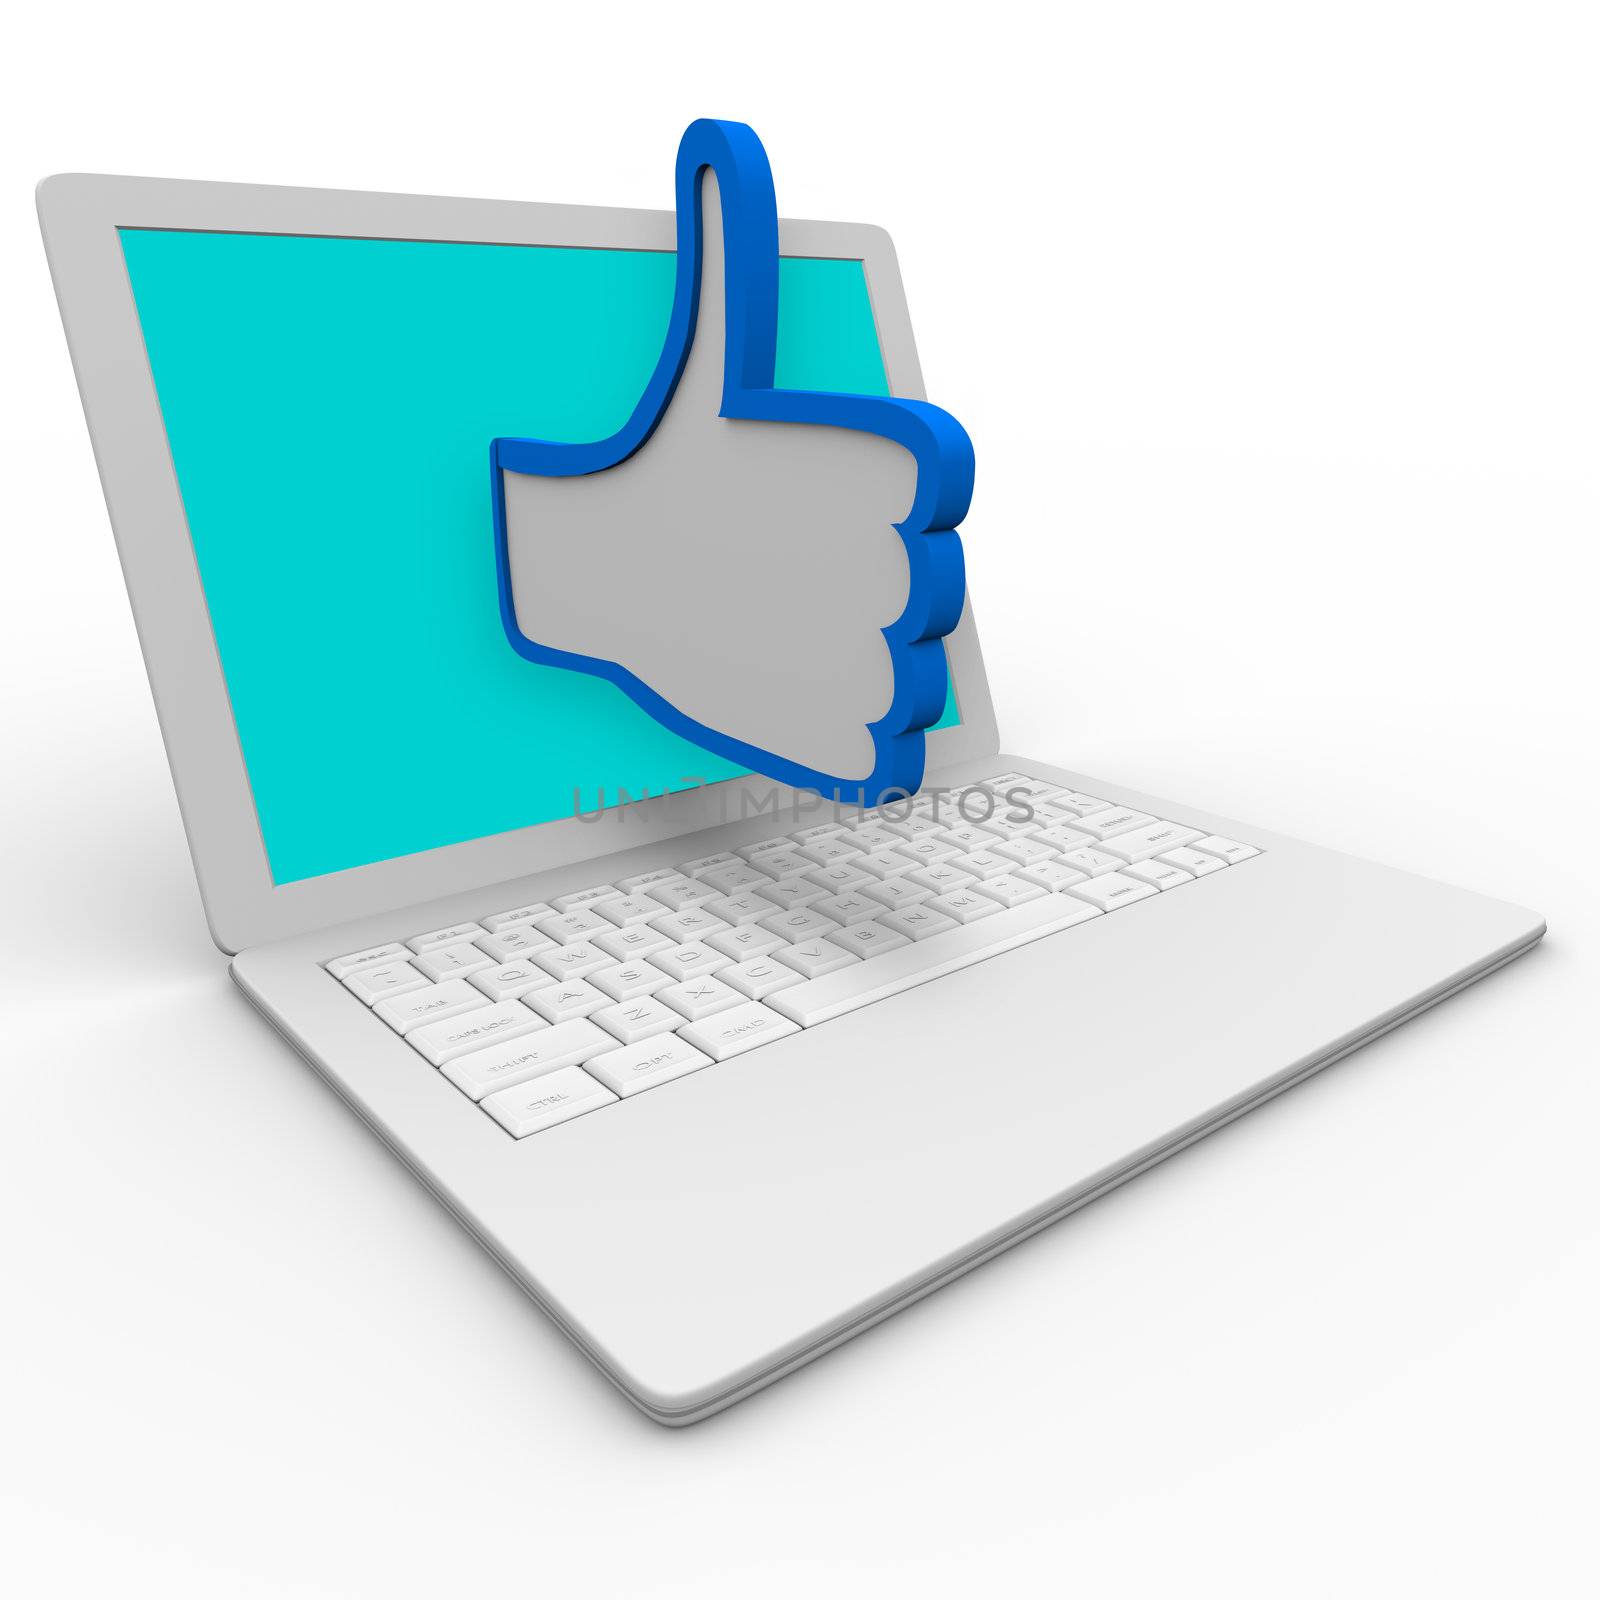 A blue and white thumbs up symbol emerges from a laptop computer screen to illustrate approval or  a positive review for a person or thing on an internet website or social network site